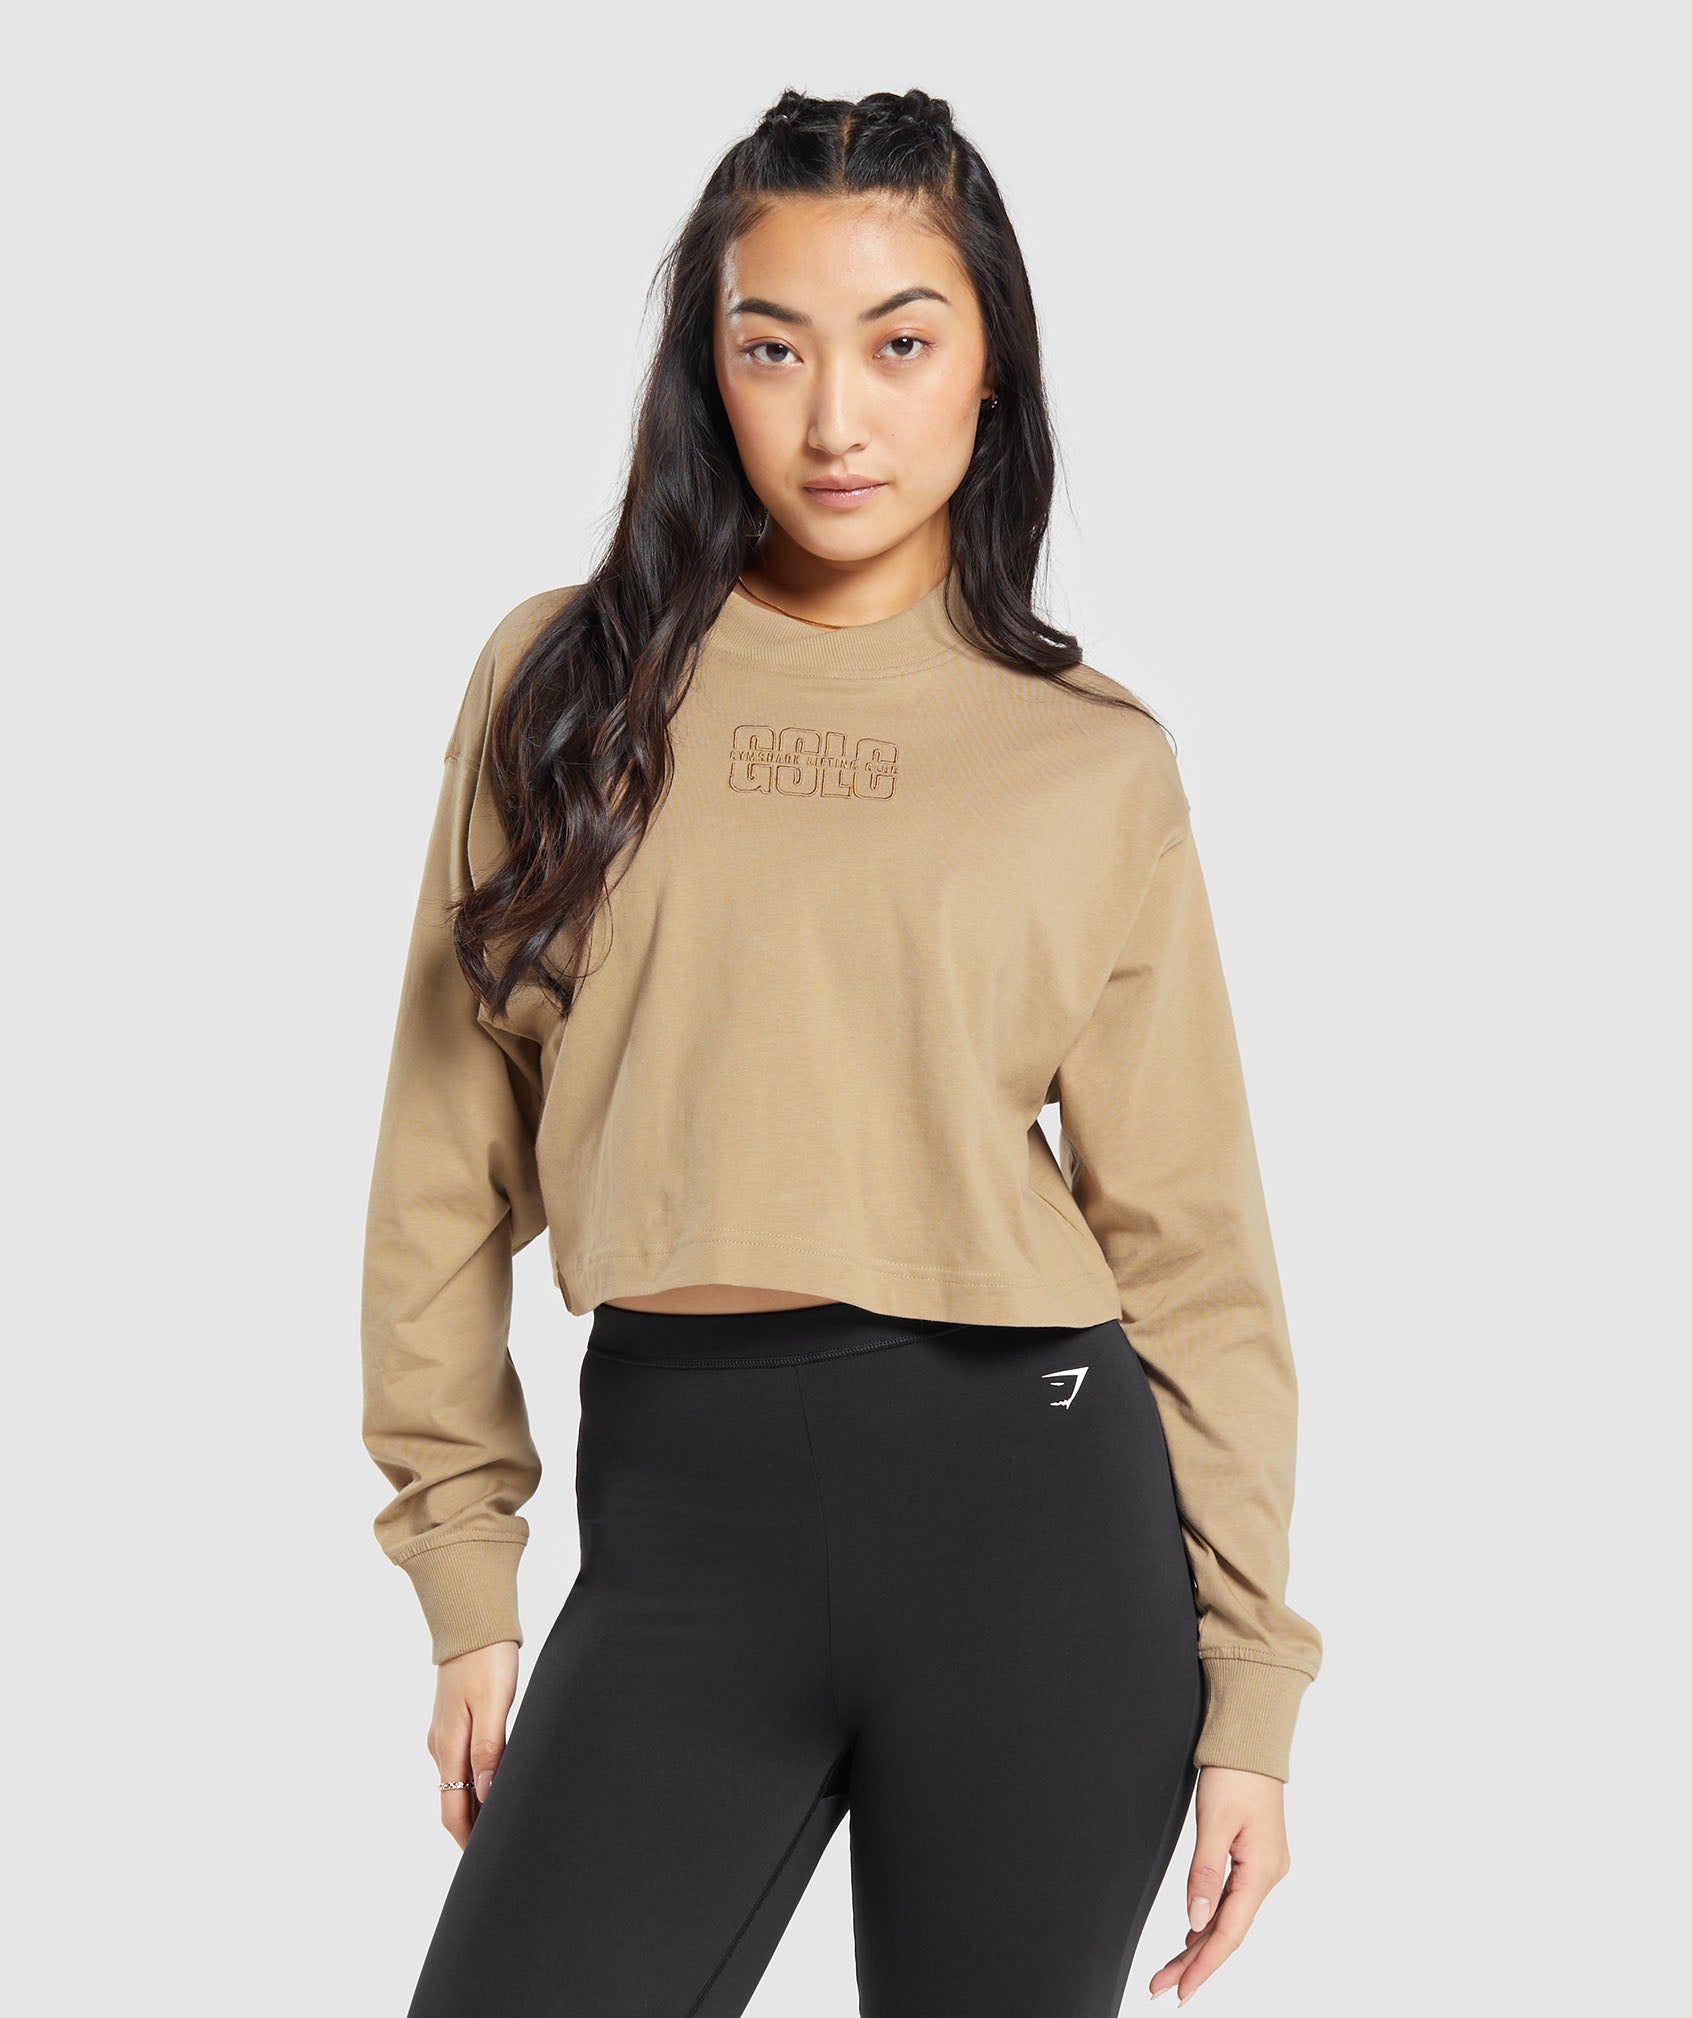 Outline Graphic Oversized Long Sleeve Top dans Deep Fawn Brown